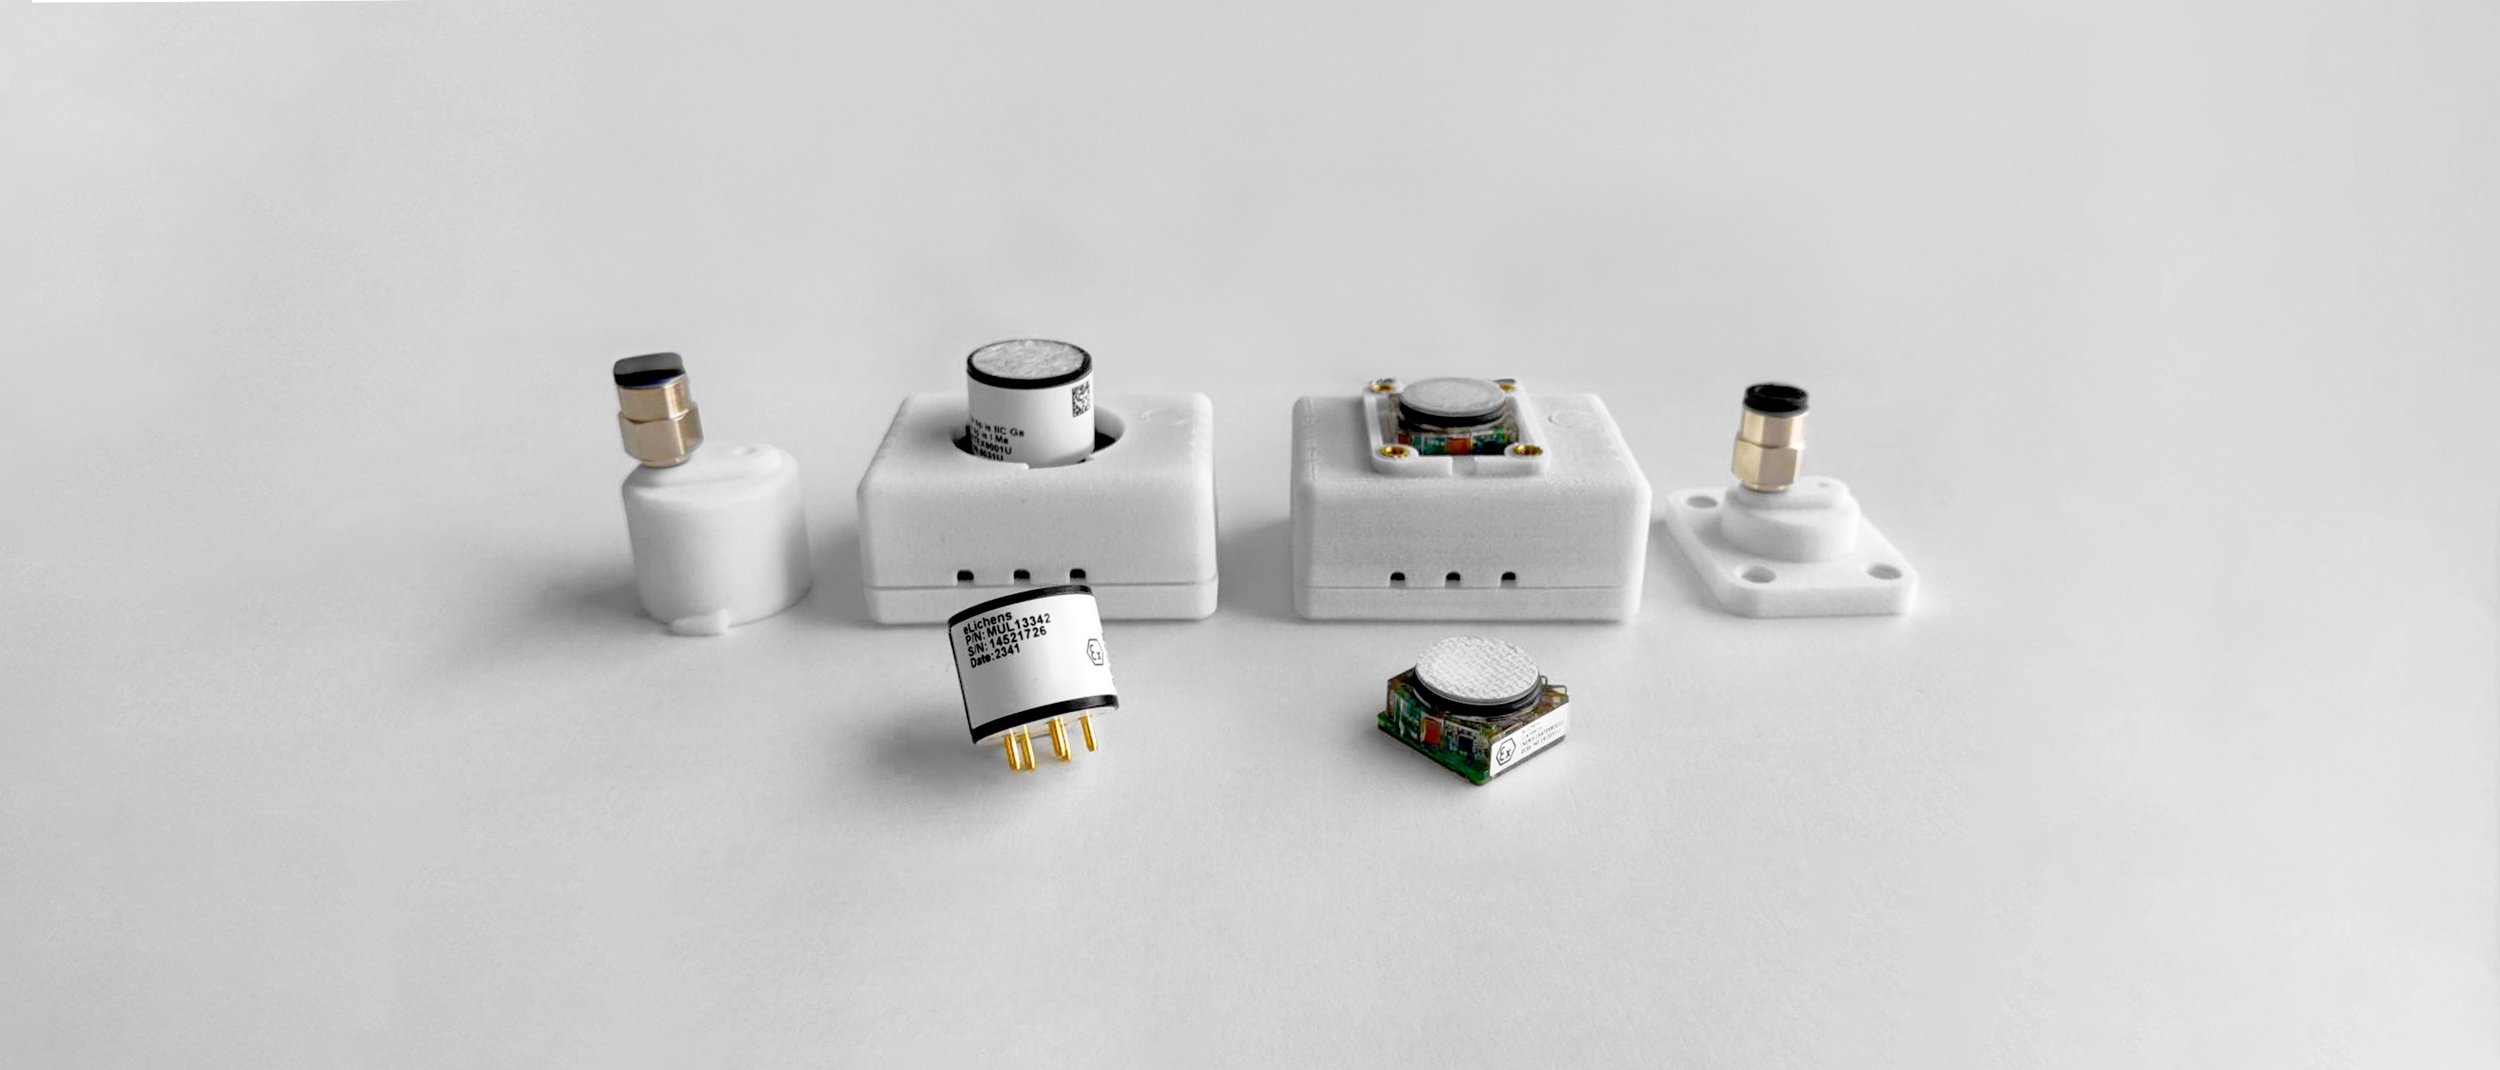   Worldwide launch    Gas Sensors Now Available on DigiKey Electronics    Shop now  